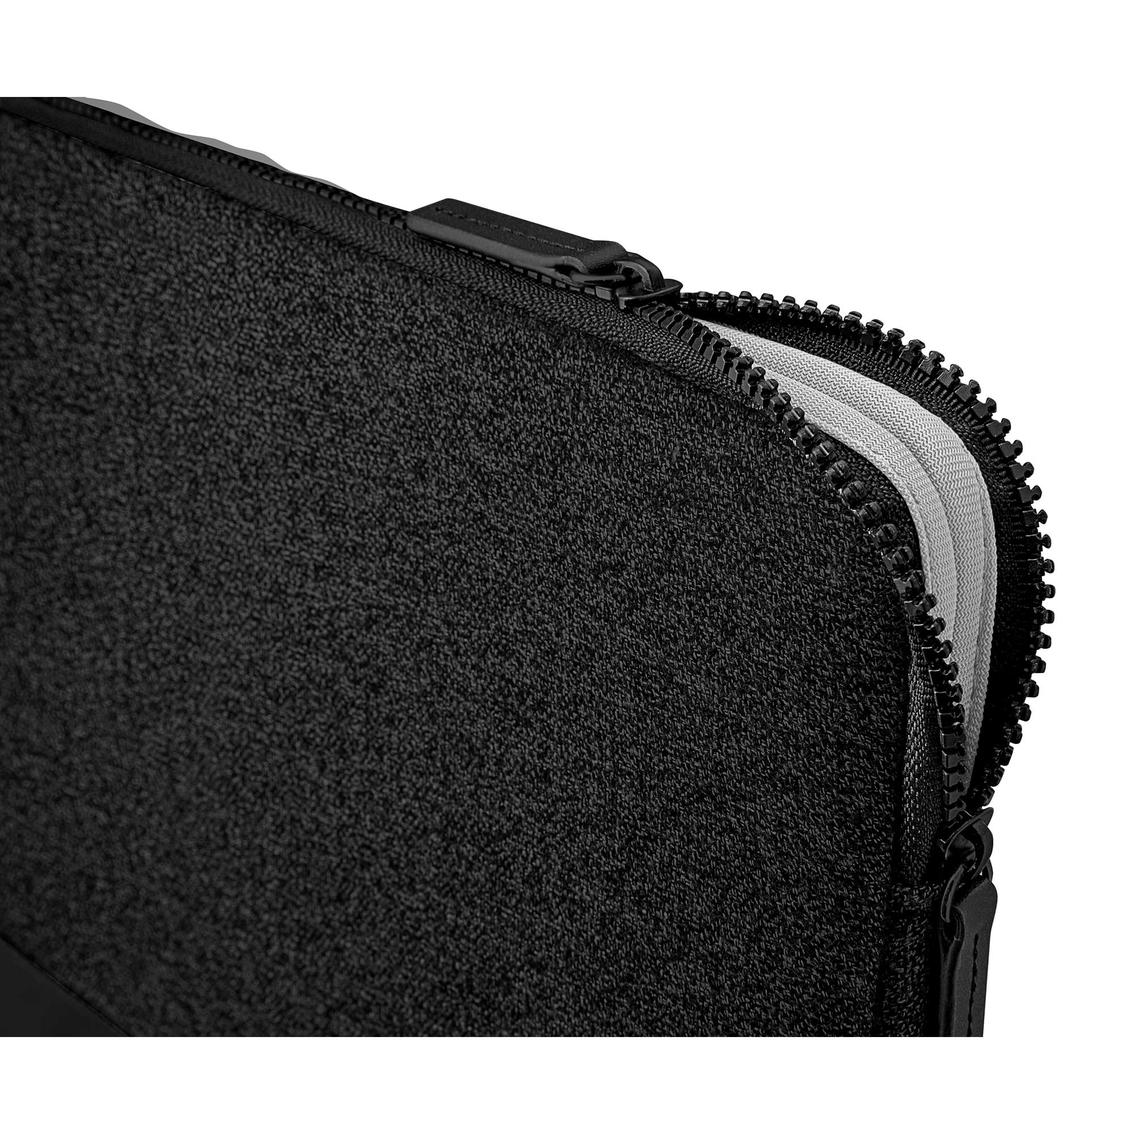 LAUT Design USA Inflight Protective Sleeve for MacBook 13 in. - Image 4 of 4